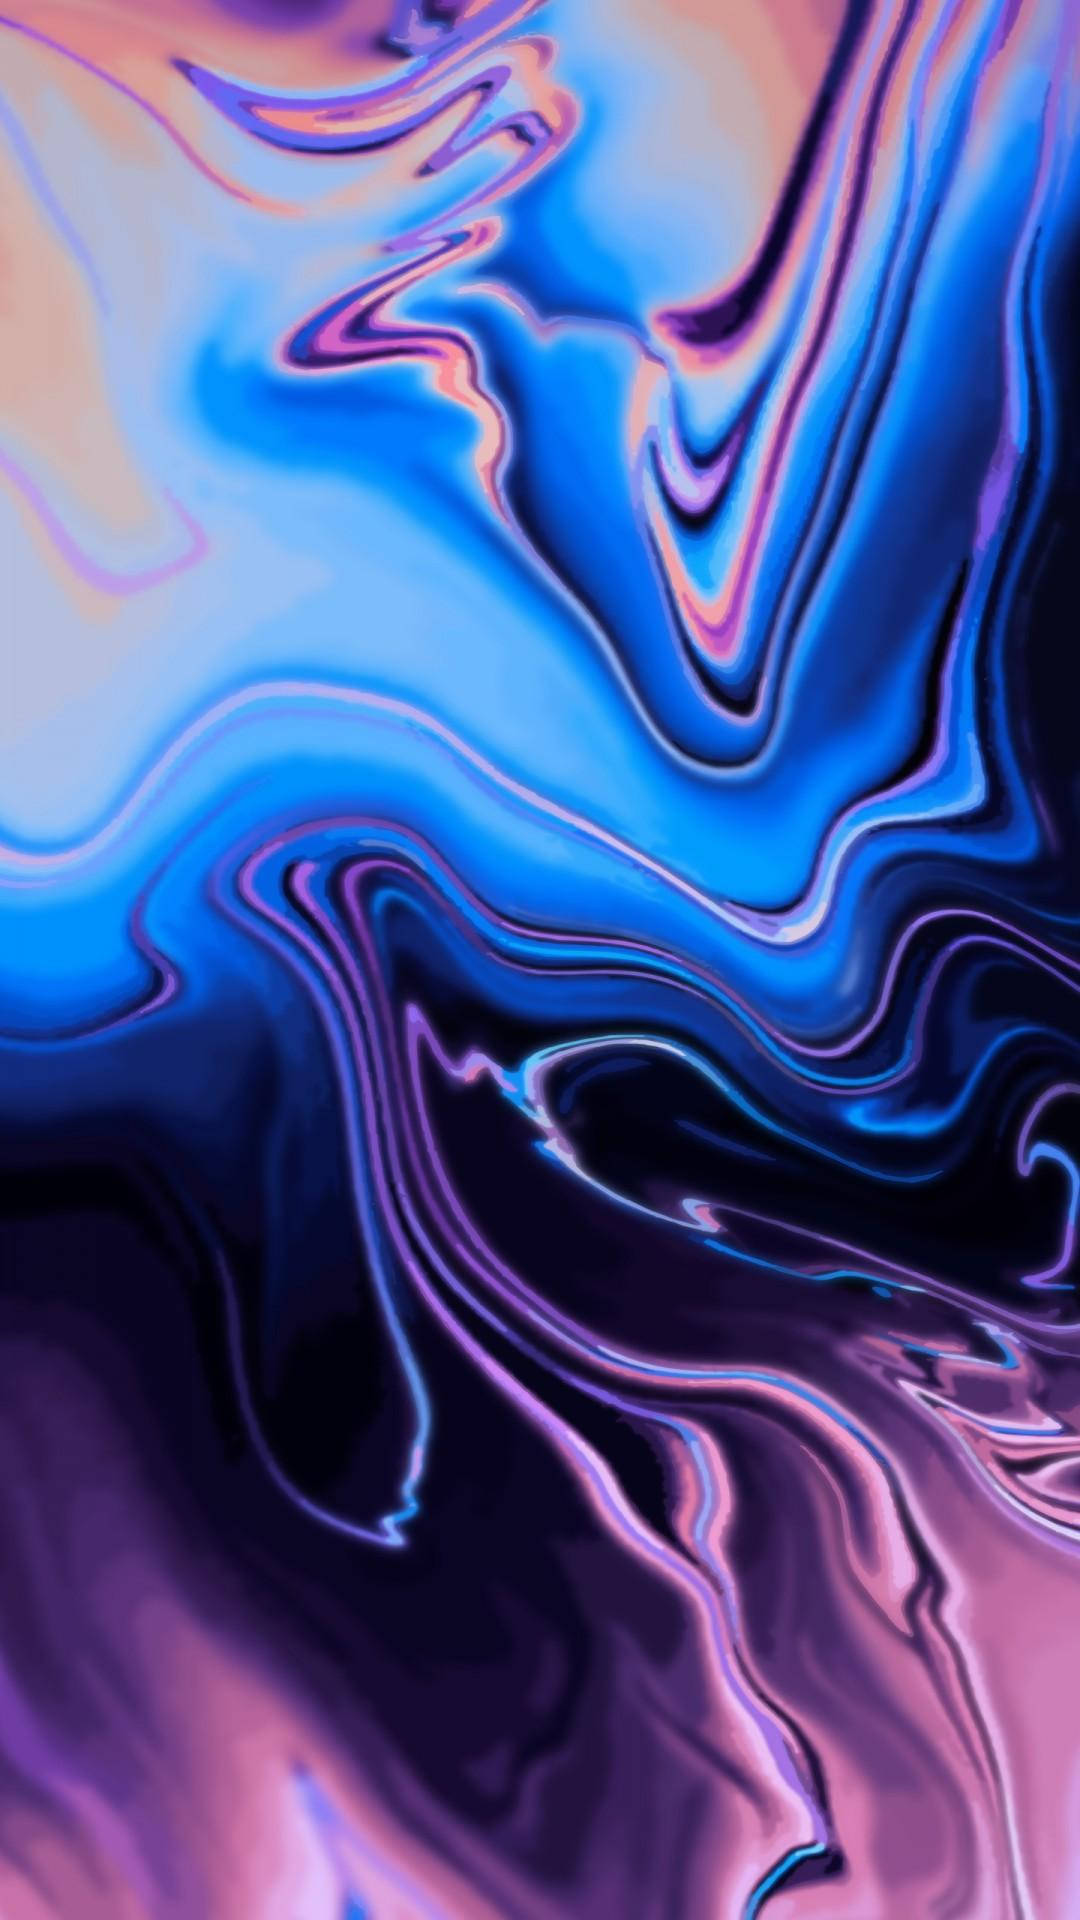 Static Blue And Violet Abstract Wallpaper